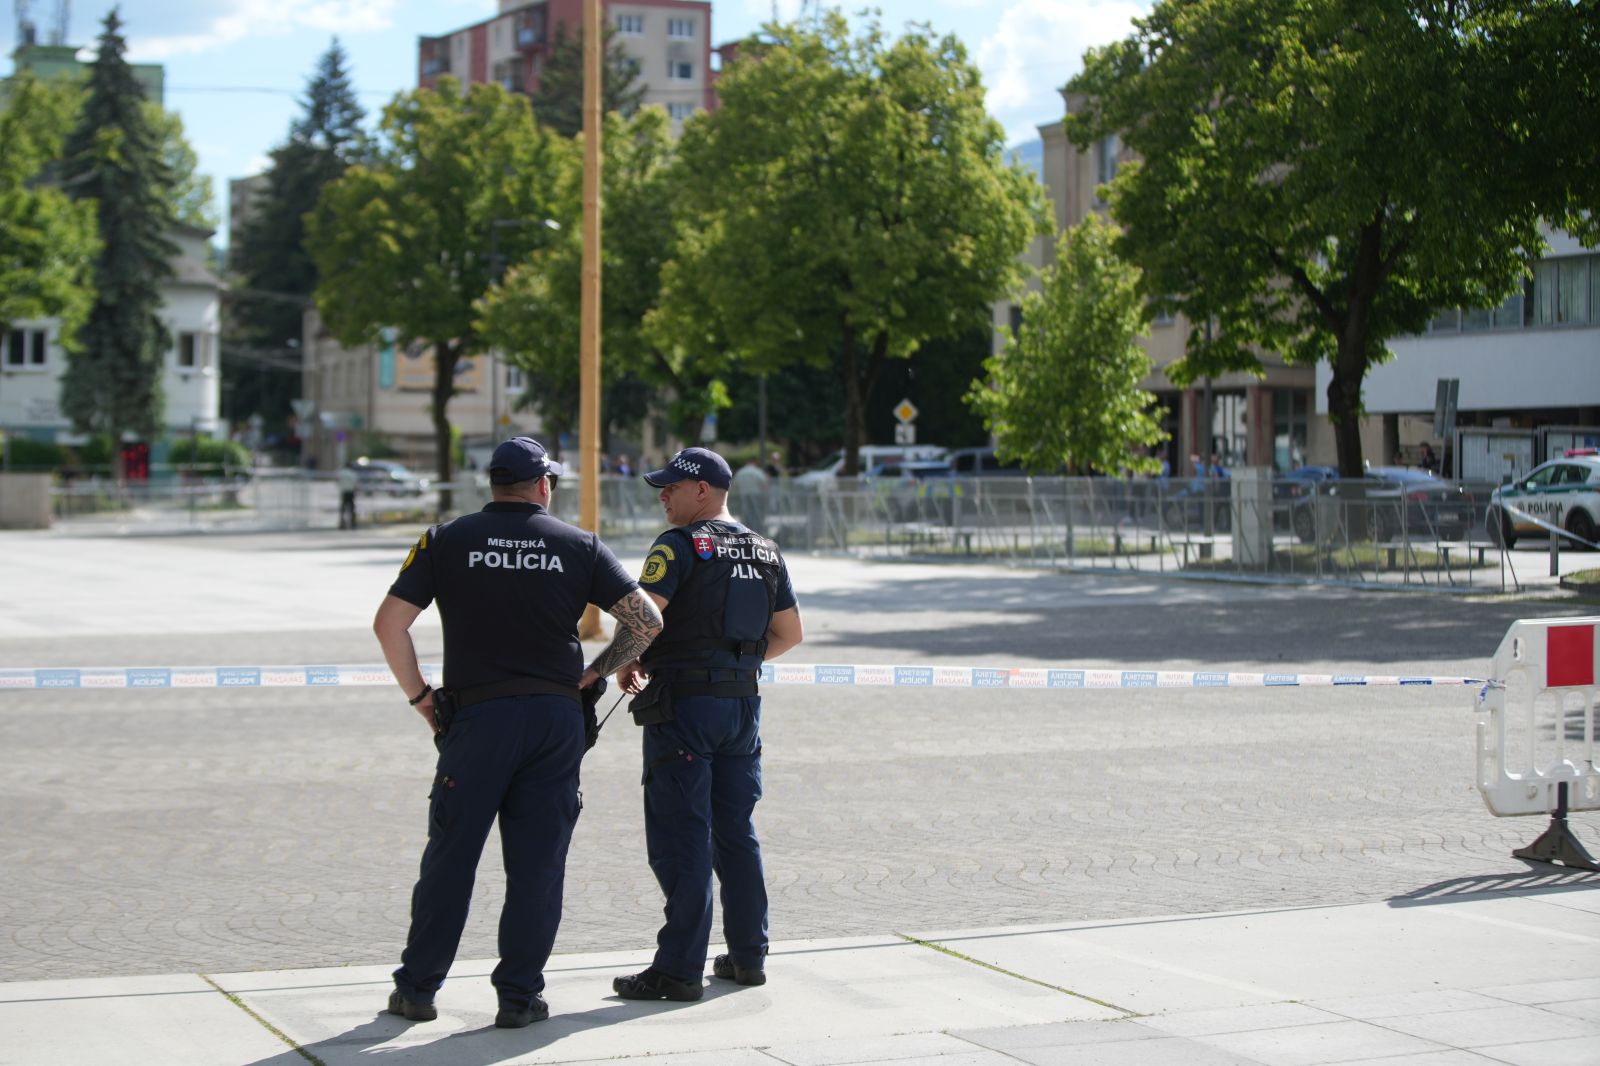 epa11342305 Police officers stand guard near the cordoned-off crime scene where Slovak Prime Minister Robert Fico was shot earlier in the day, in Handlova, Slovakia, 15 May 2024. According to a statement from the Slovak government office on 15 May, "following a government meeting in Handlova, there was an assassination attempt on the Prime Minister of the Slovak Republic Robert Fico. He is currently being transported by helicopter to Banska Bystrica Hospital in a life-threatening condition."  EPA/JAKUB GAVLAK